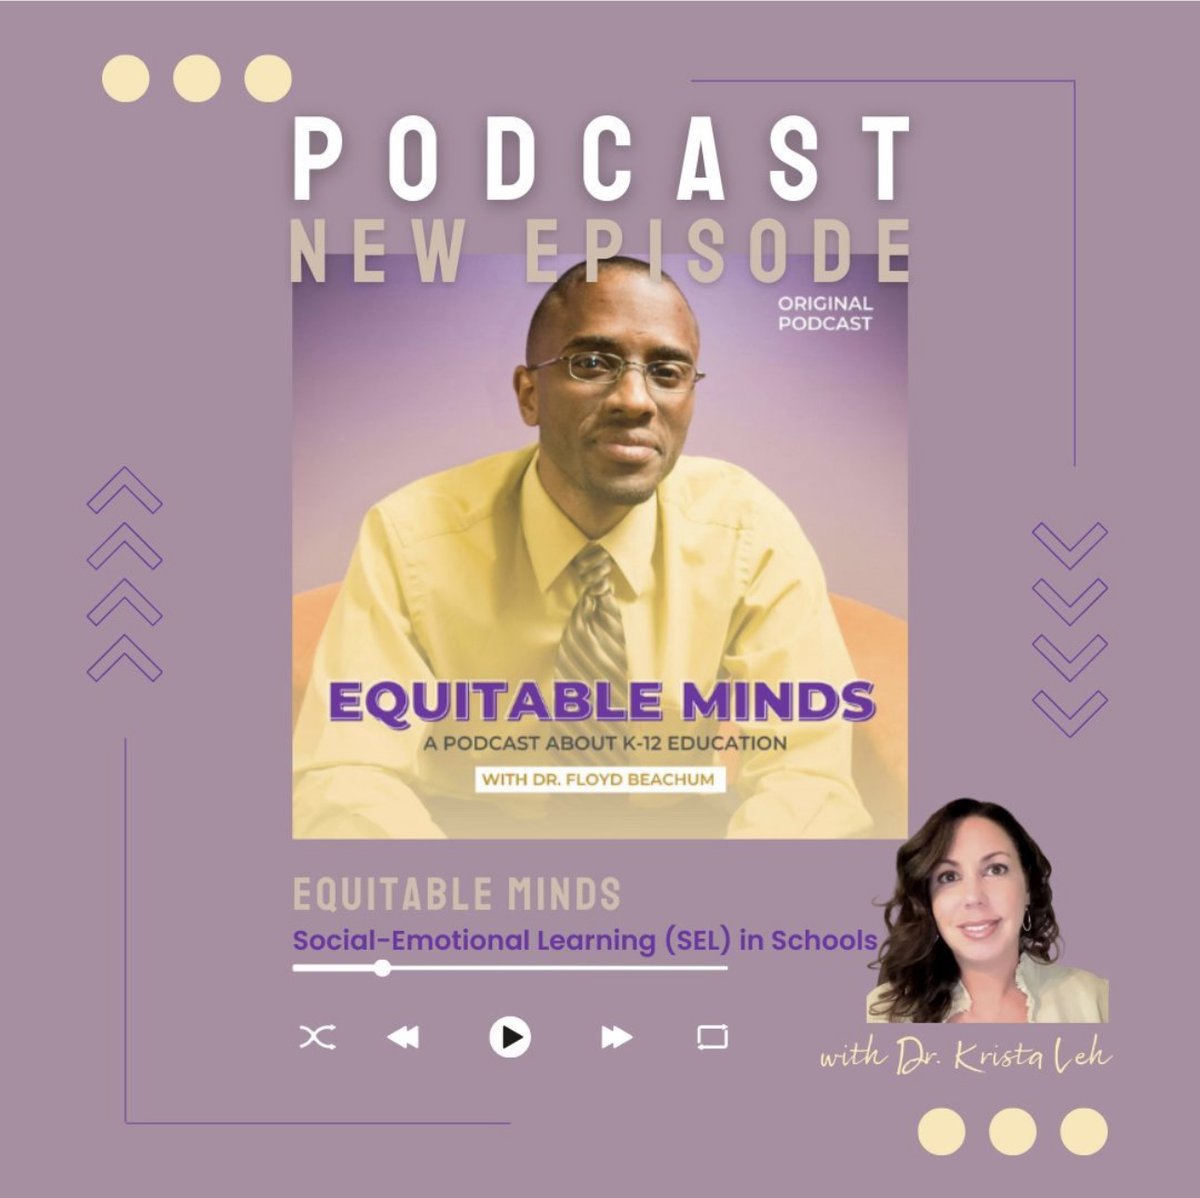 Our talk focuses on understanding what SEL is, the importance of SEL for student development, & what ed leaders should consider when implementing SEL programs in their districts.We also discuss the nat'l political debate about SEL. podcasts.apple.com/ca/podcast/soc… #SEL #equitableminds